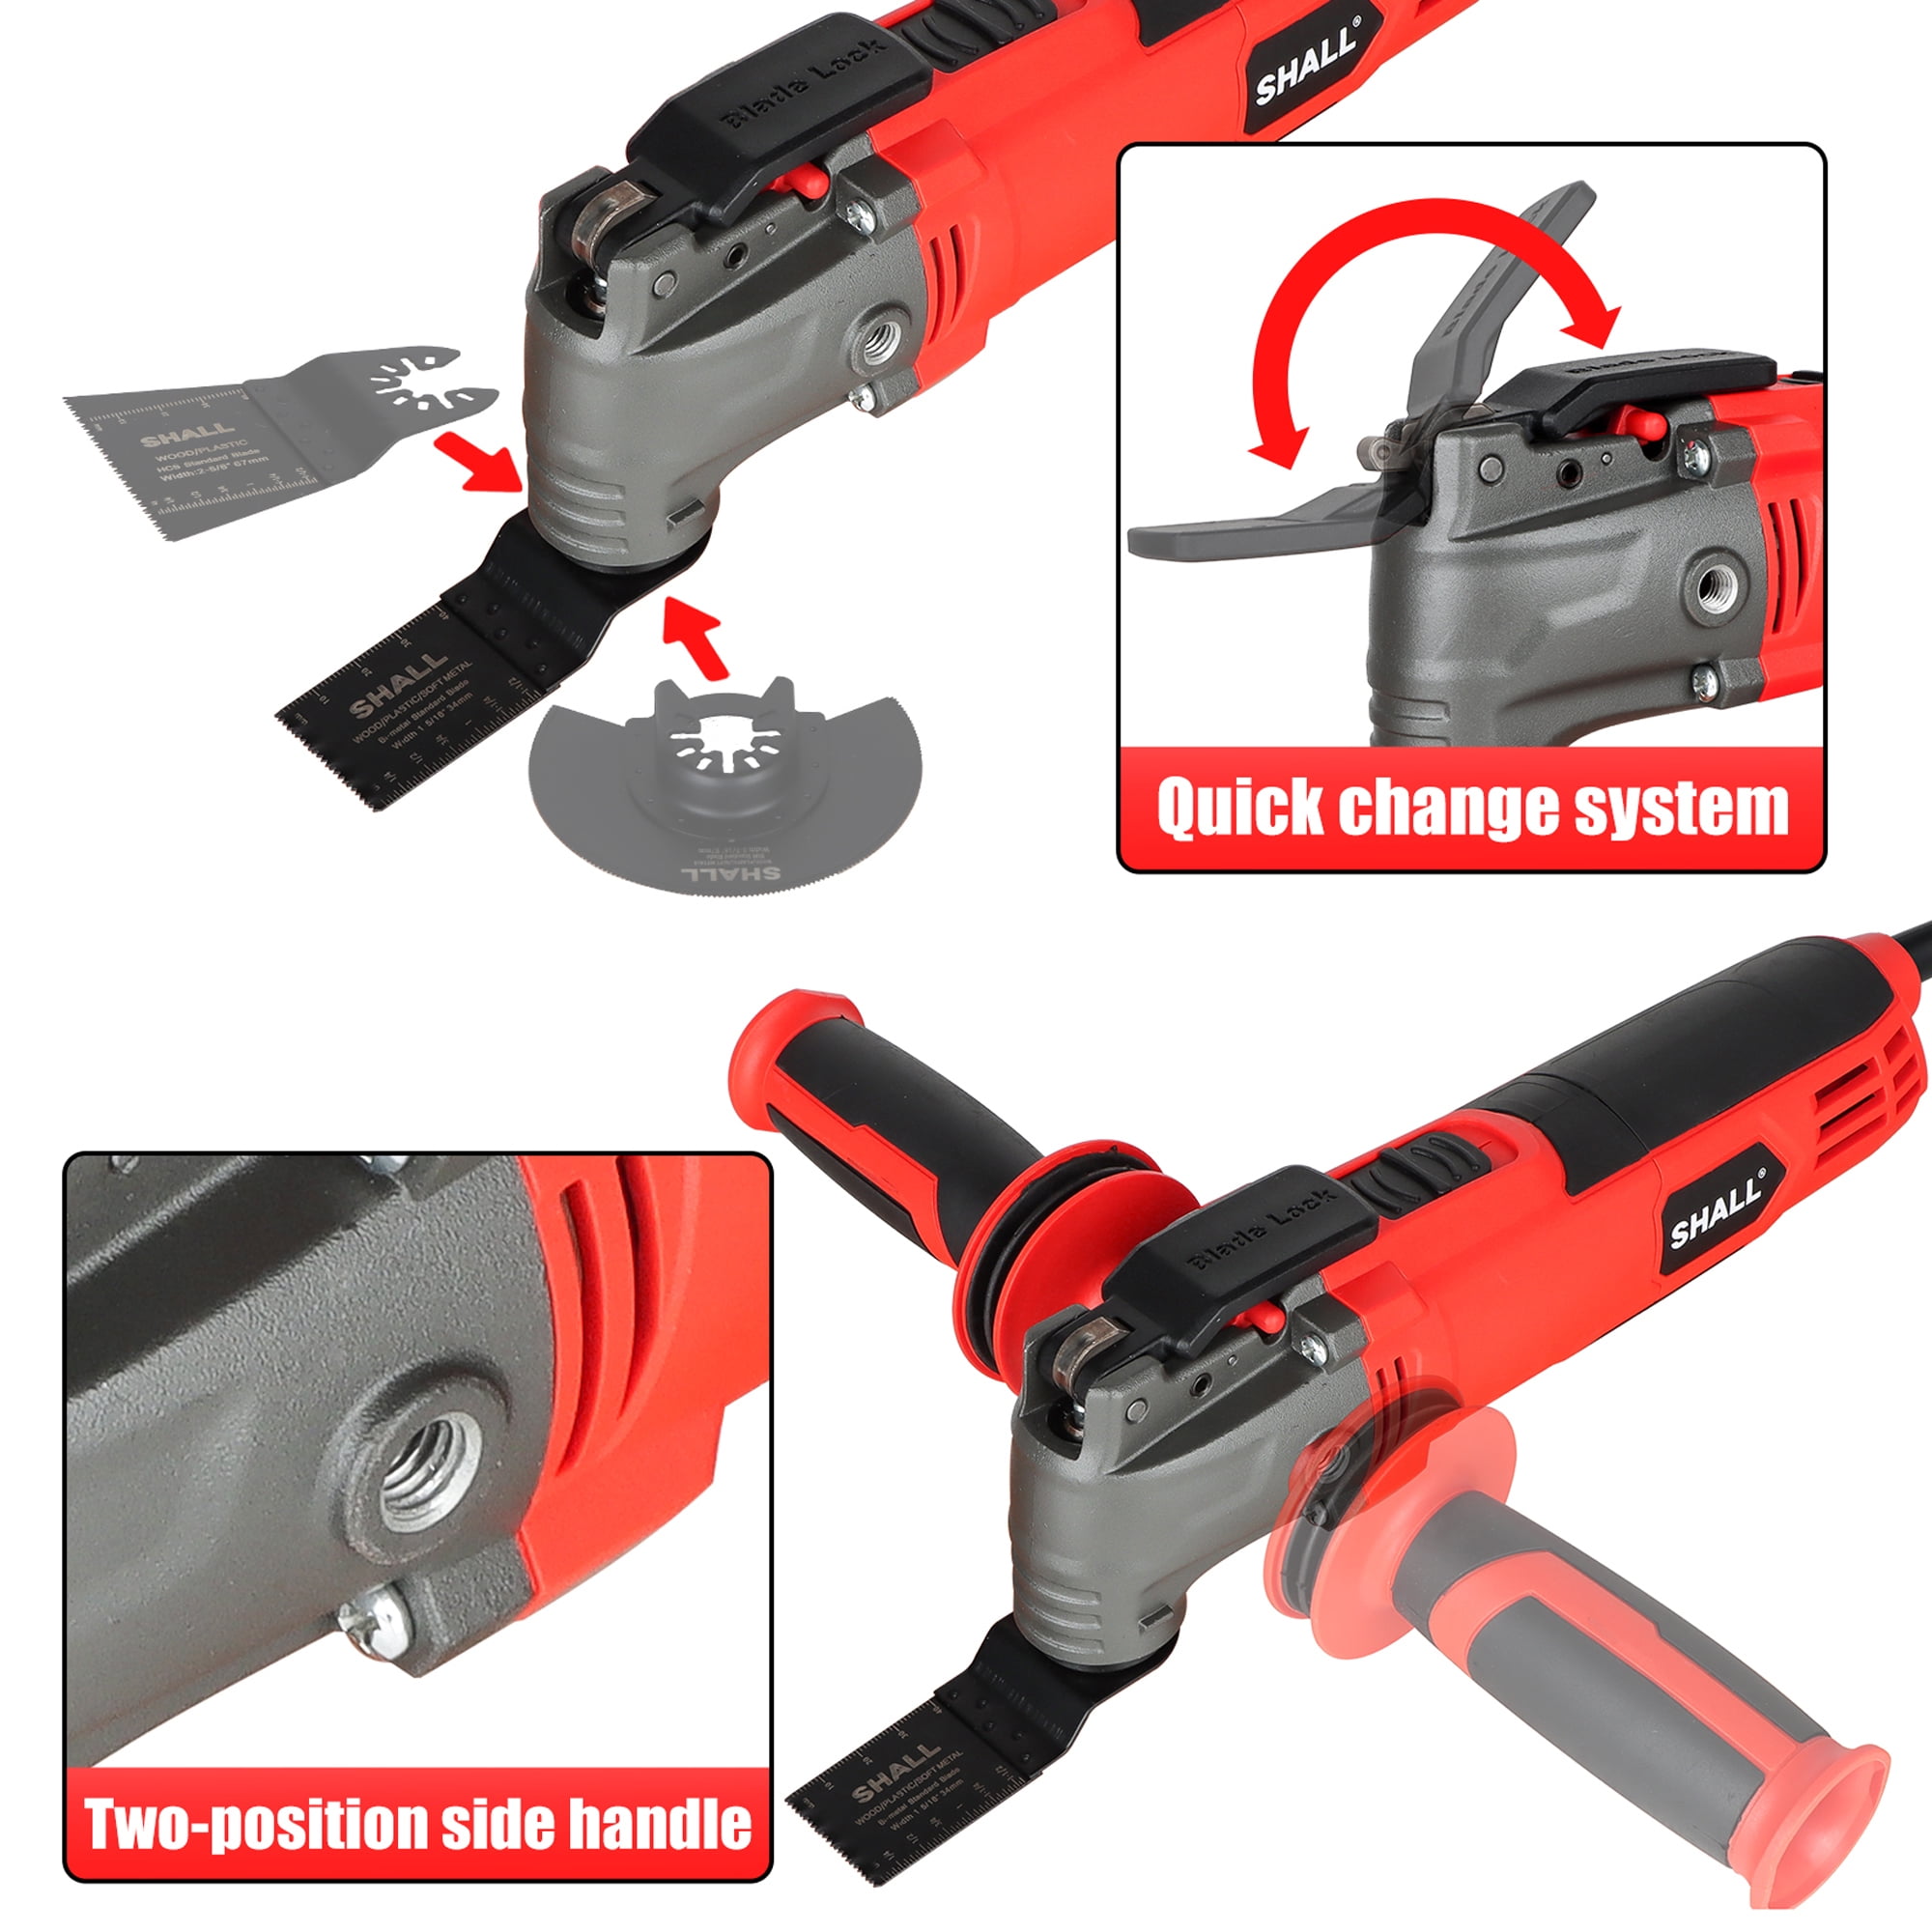 4 Genius Oscillating Multi Tool Uses (for Electricians) - Rack-A-Tiers